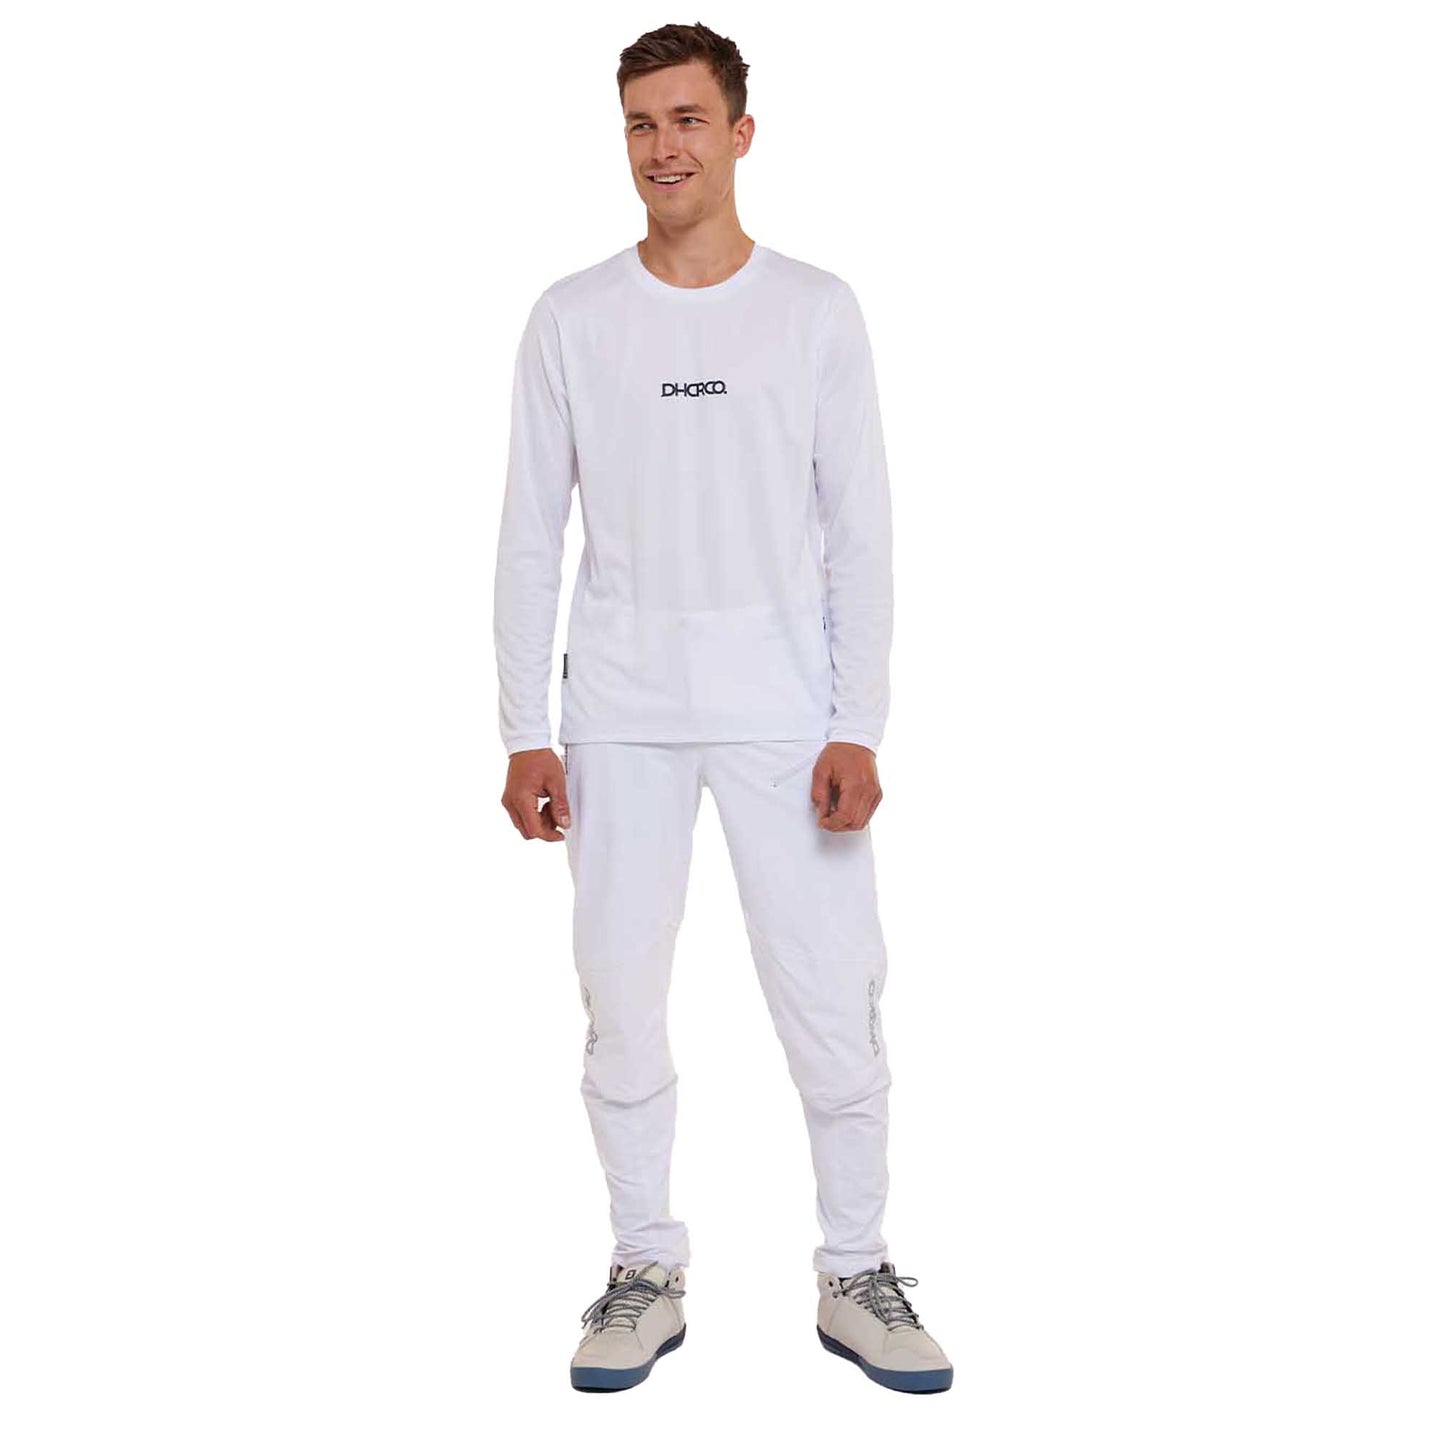 DHaRCO Men's Gravity Long Sleeve Jersey - L - White Out